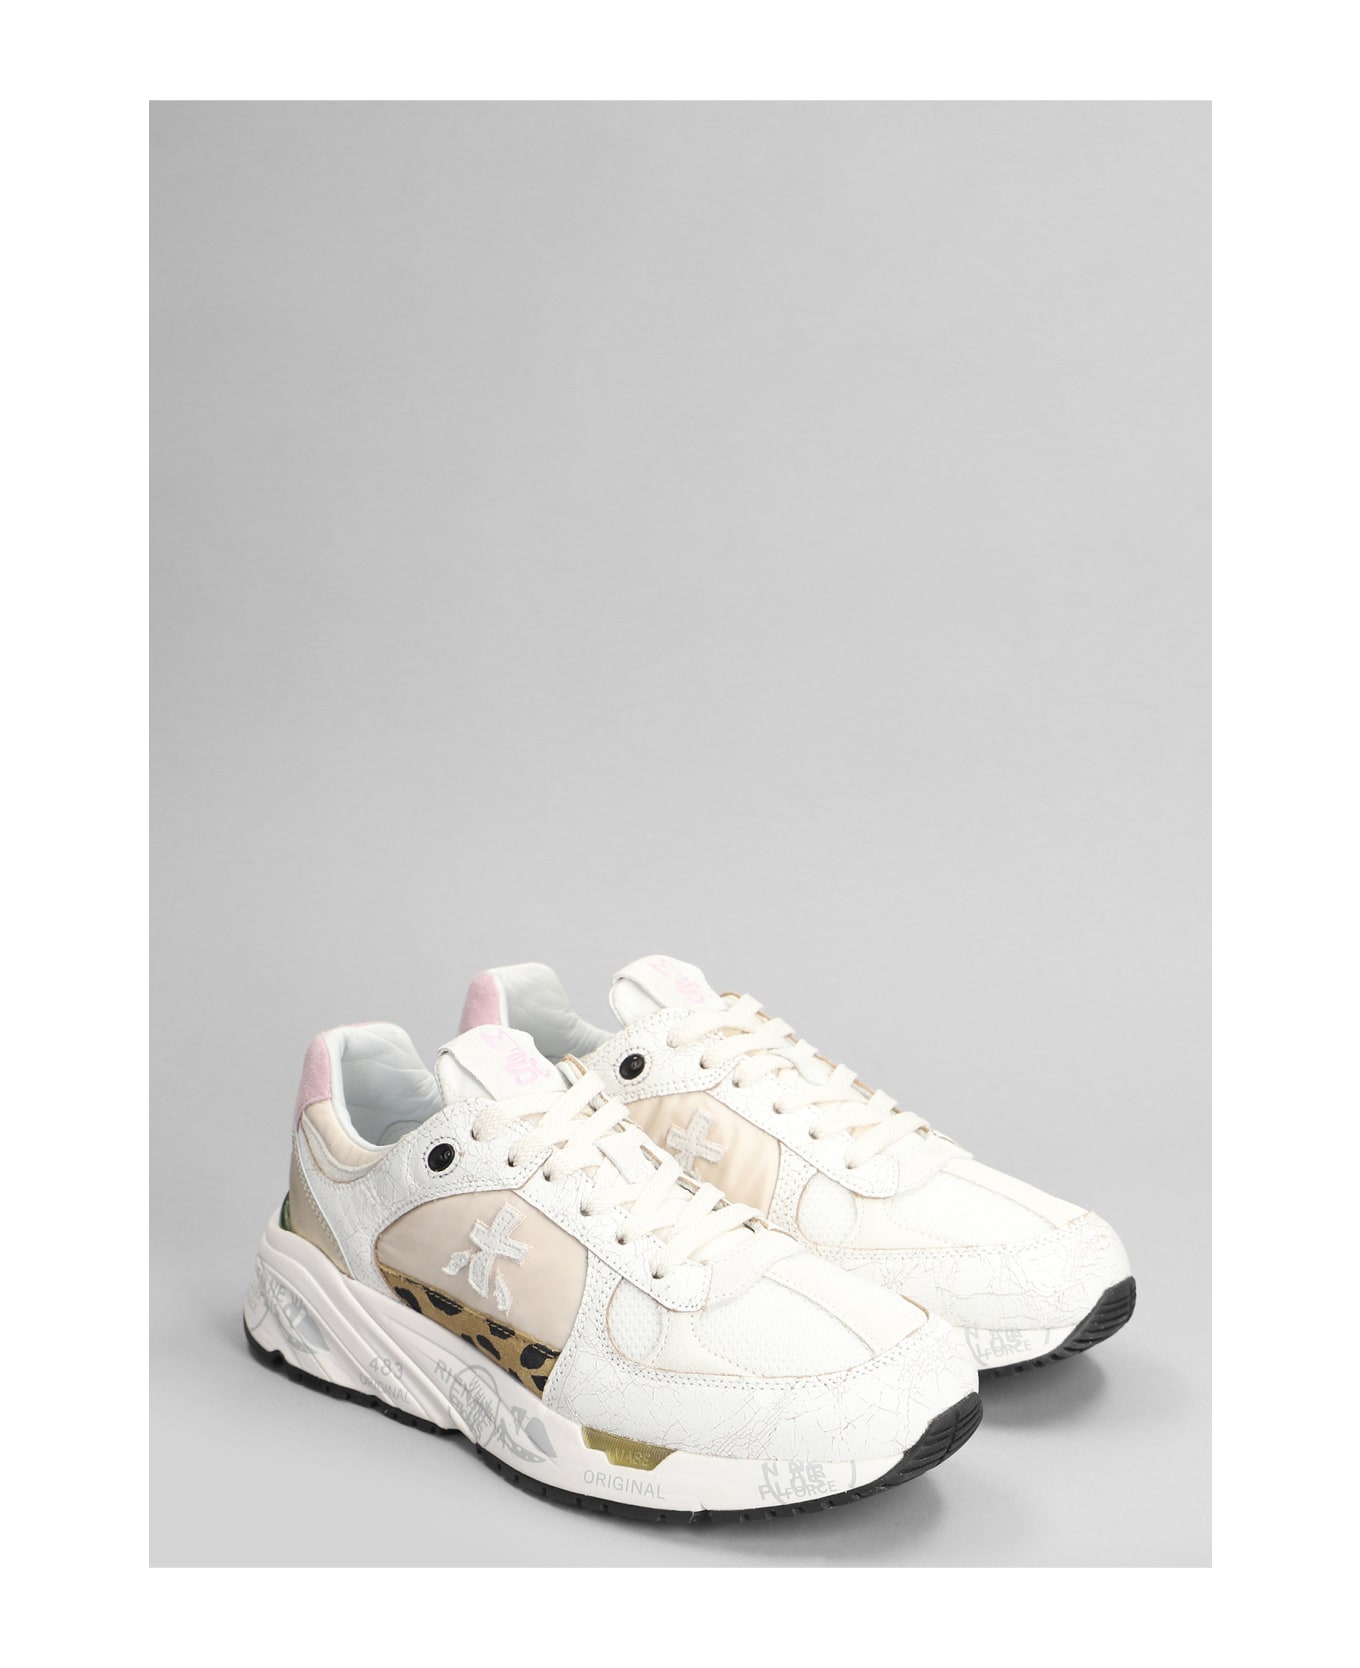 Premiata Mased Leather, Suede And Nylon Sneakers - Multicolor スニーカー